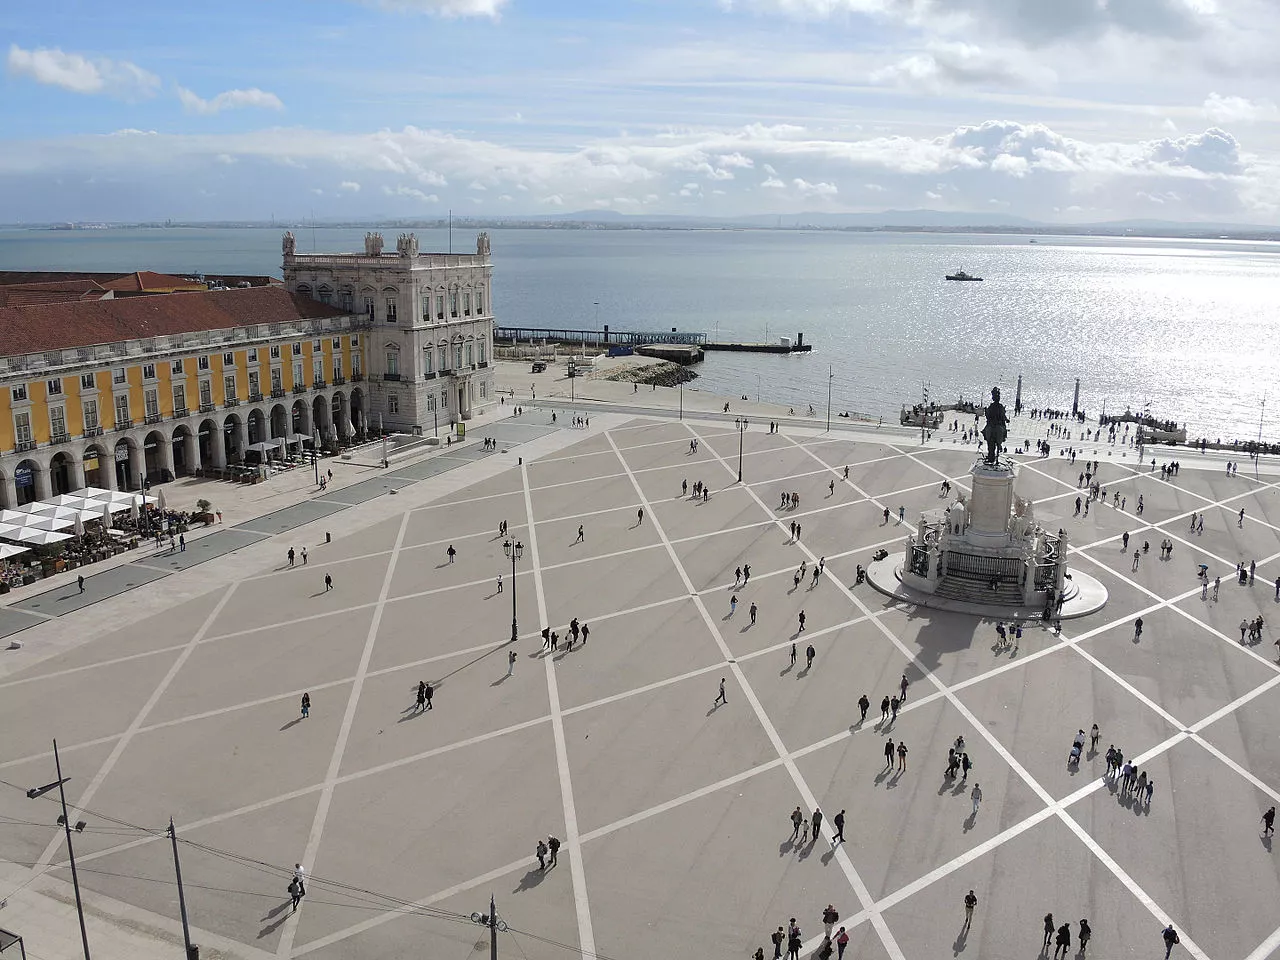 Commerce Square in Portugal, Europe | Architecture - Rated 5.4